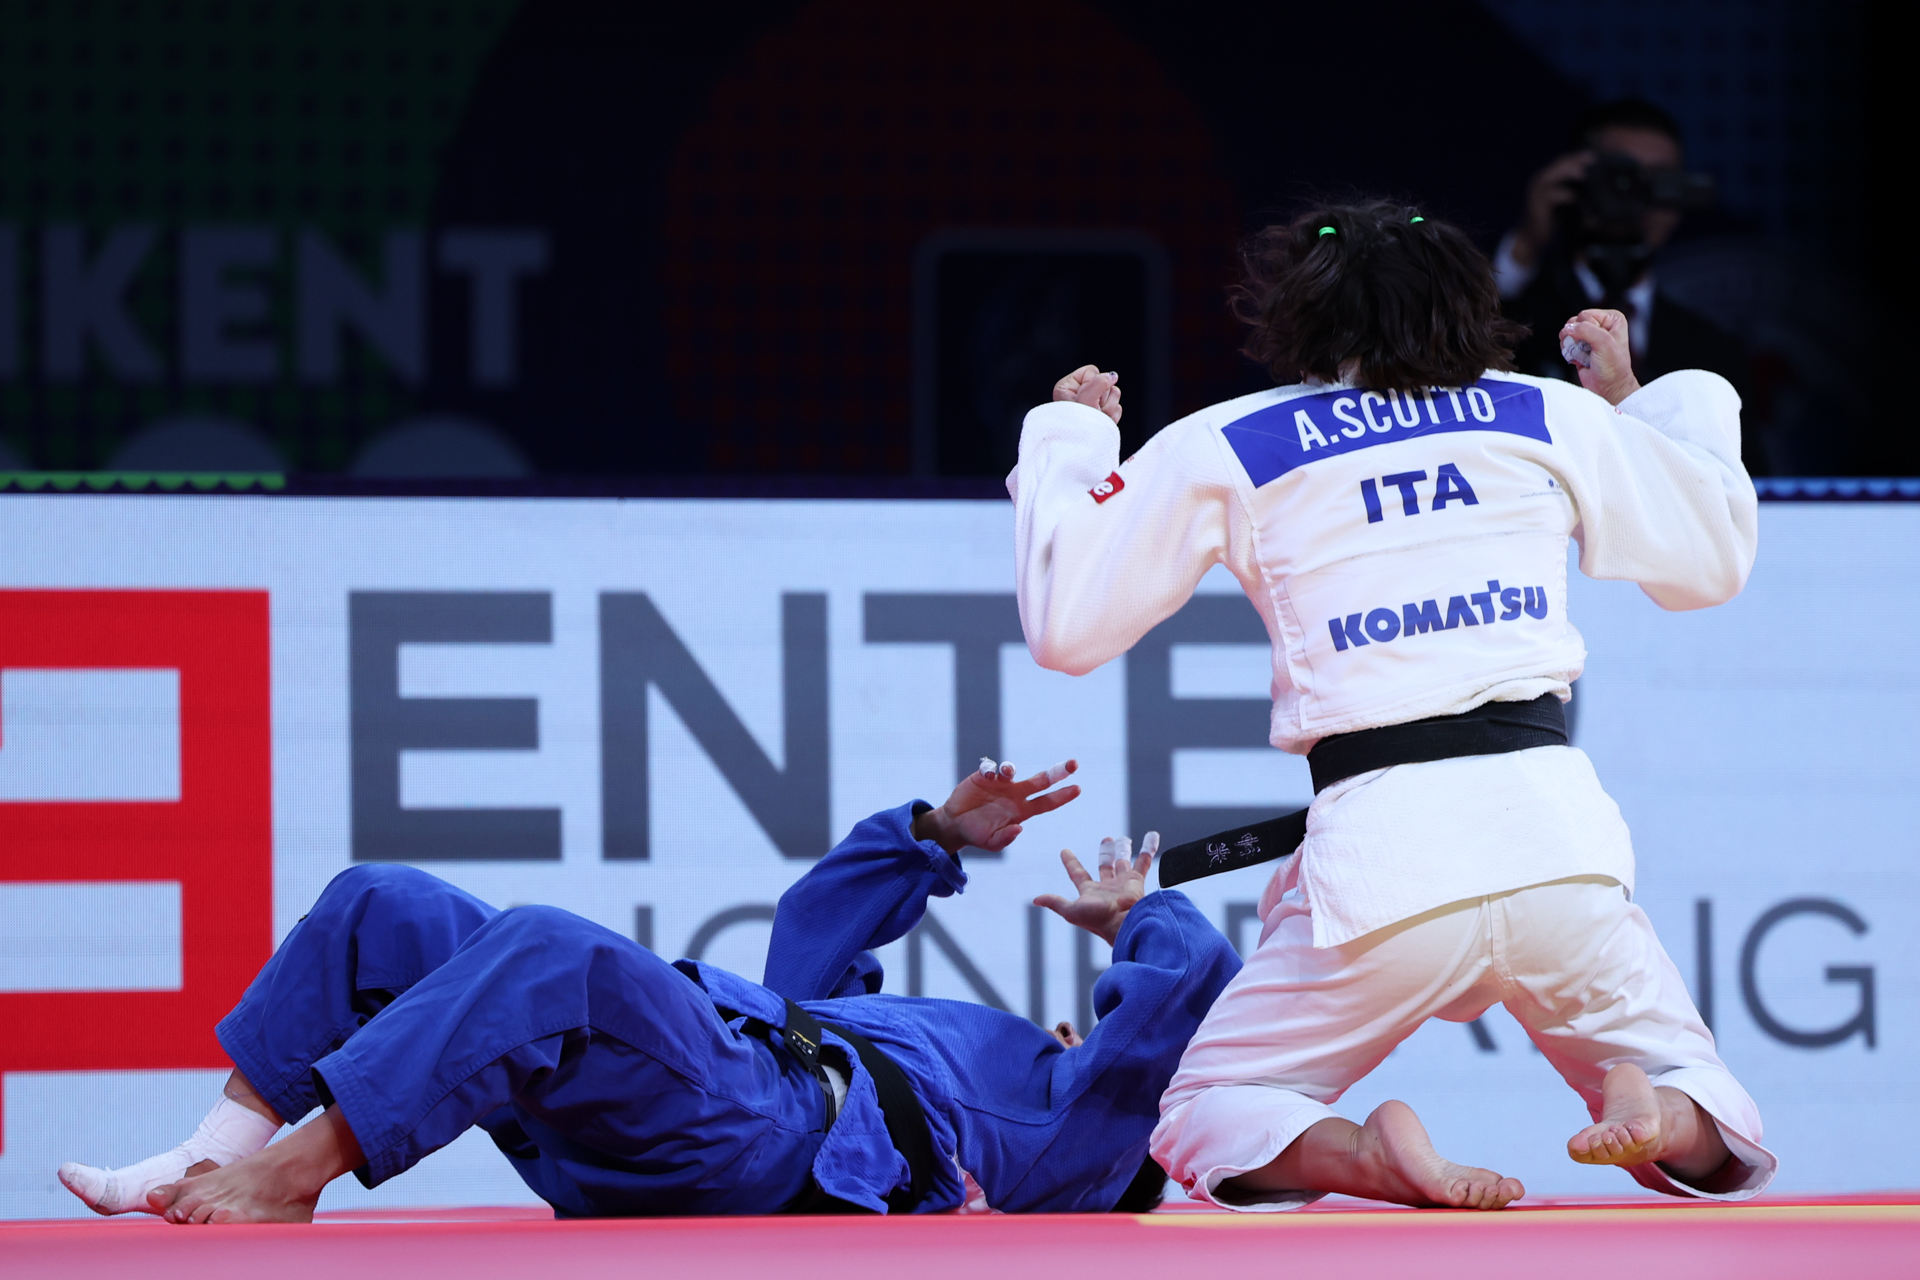 DAY OF FIRSTS FOR EUROPEAN MEDALLISTS IN TASHKENT